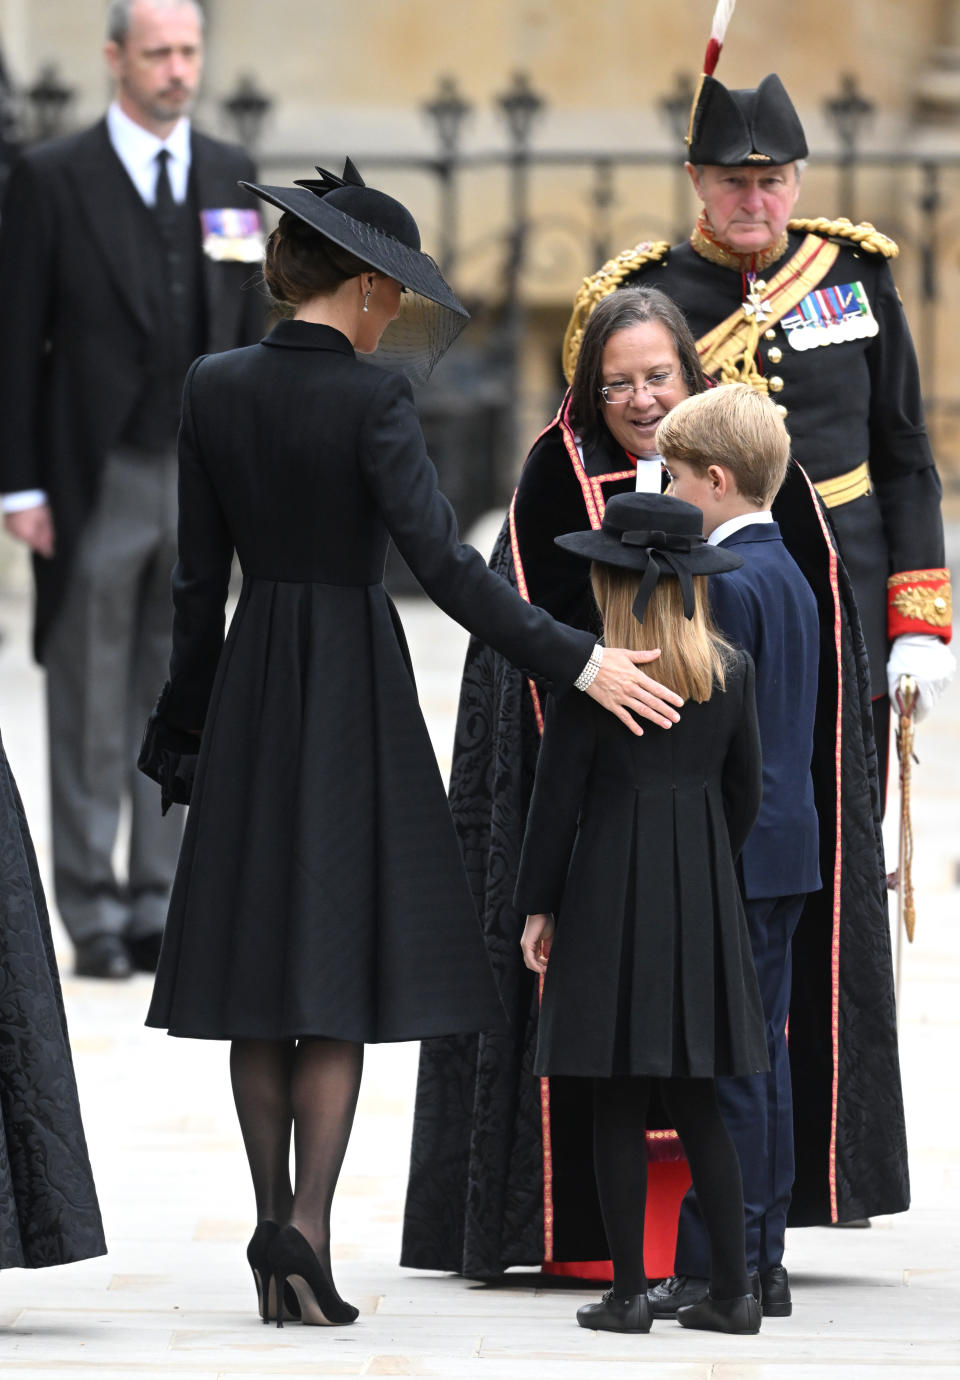 LONDON, ENGLAND - SEPTEMBER 19:  Catherine, Princess of Wales, Princess Charlotte of Wales and Prince George of Wales arrive for the State Funeral of Queen Elizabeth II at Westminster Abbey on September 19, 2022 in London, England.  Elizabeth Alexandra Mary Windsor was born in Bruton Street, Mayfair, London on 21 April 1926. She married Prince Philip in 1947 and ascended the throne of the United Kingdom and Commonwealth on 6 February 1952 after the death of her Father, King George VI. Queen Elizabeth II died at Balmoral Castle in Scotland on September 8, 2022, and is succeeded by her eldest son, King Charles III. (Photo by Samir Hussein/WireImage)